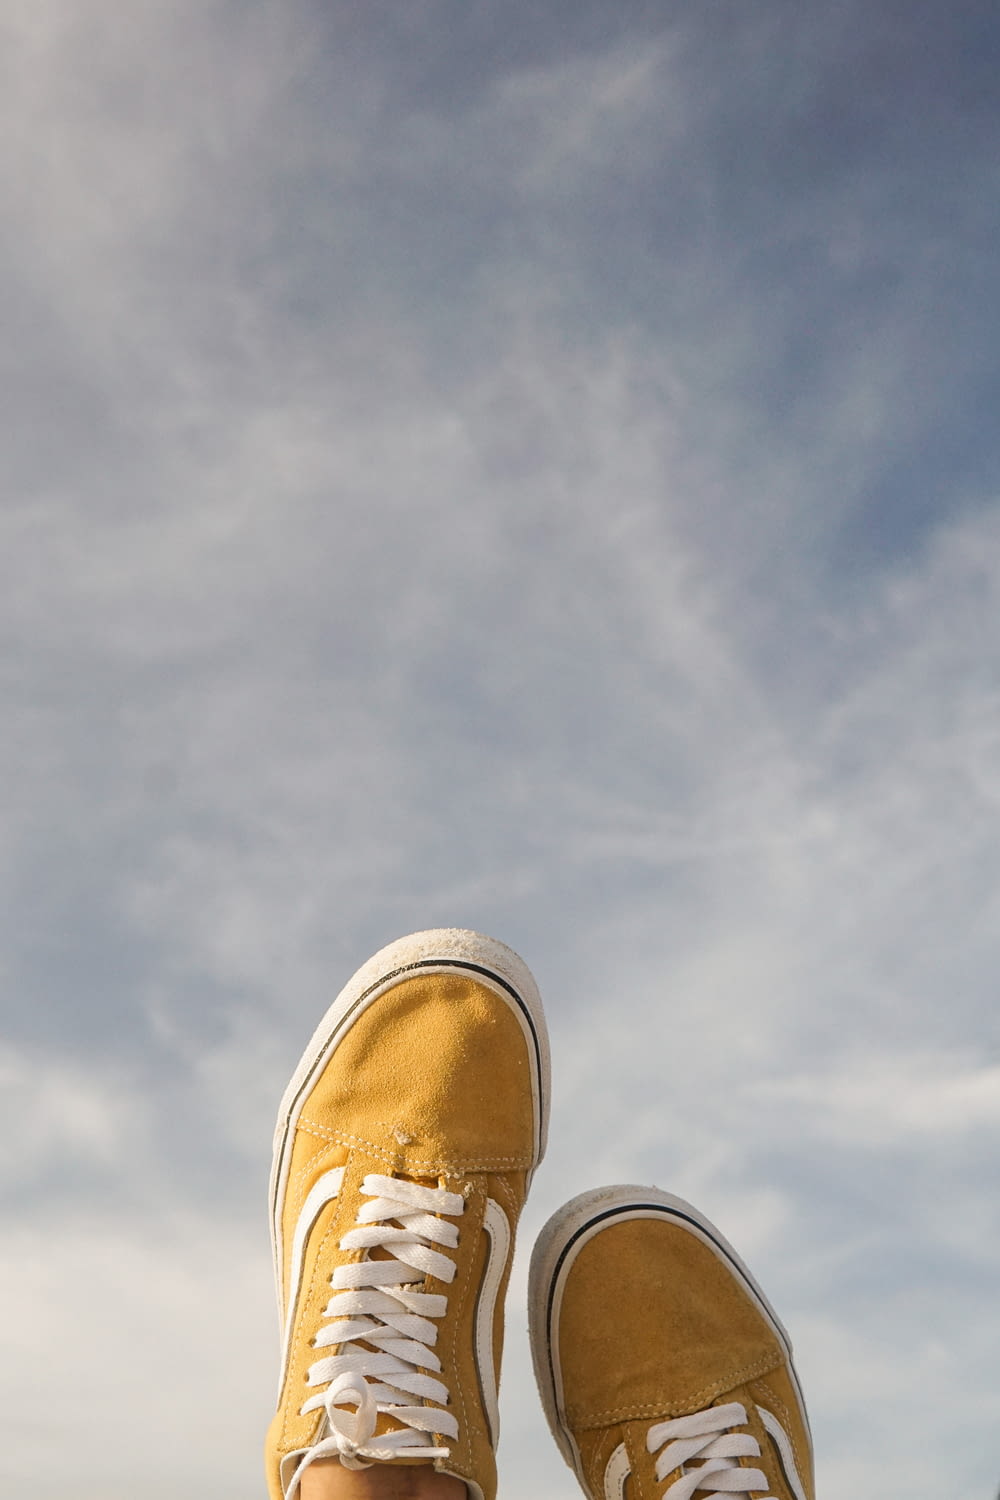 a person's feet with yellow shoes standing on a ledge